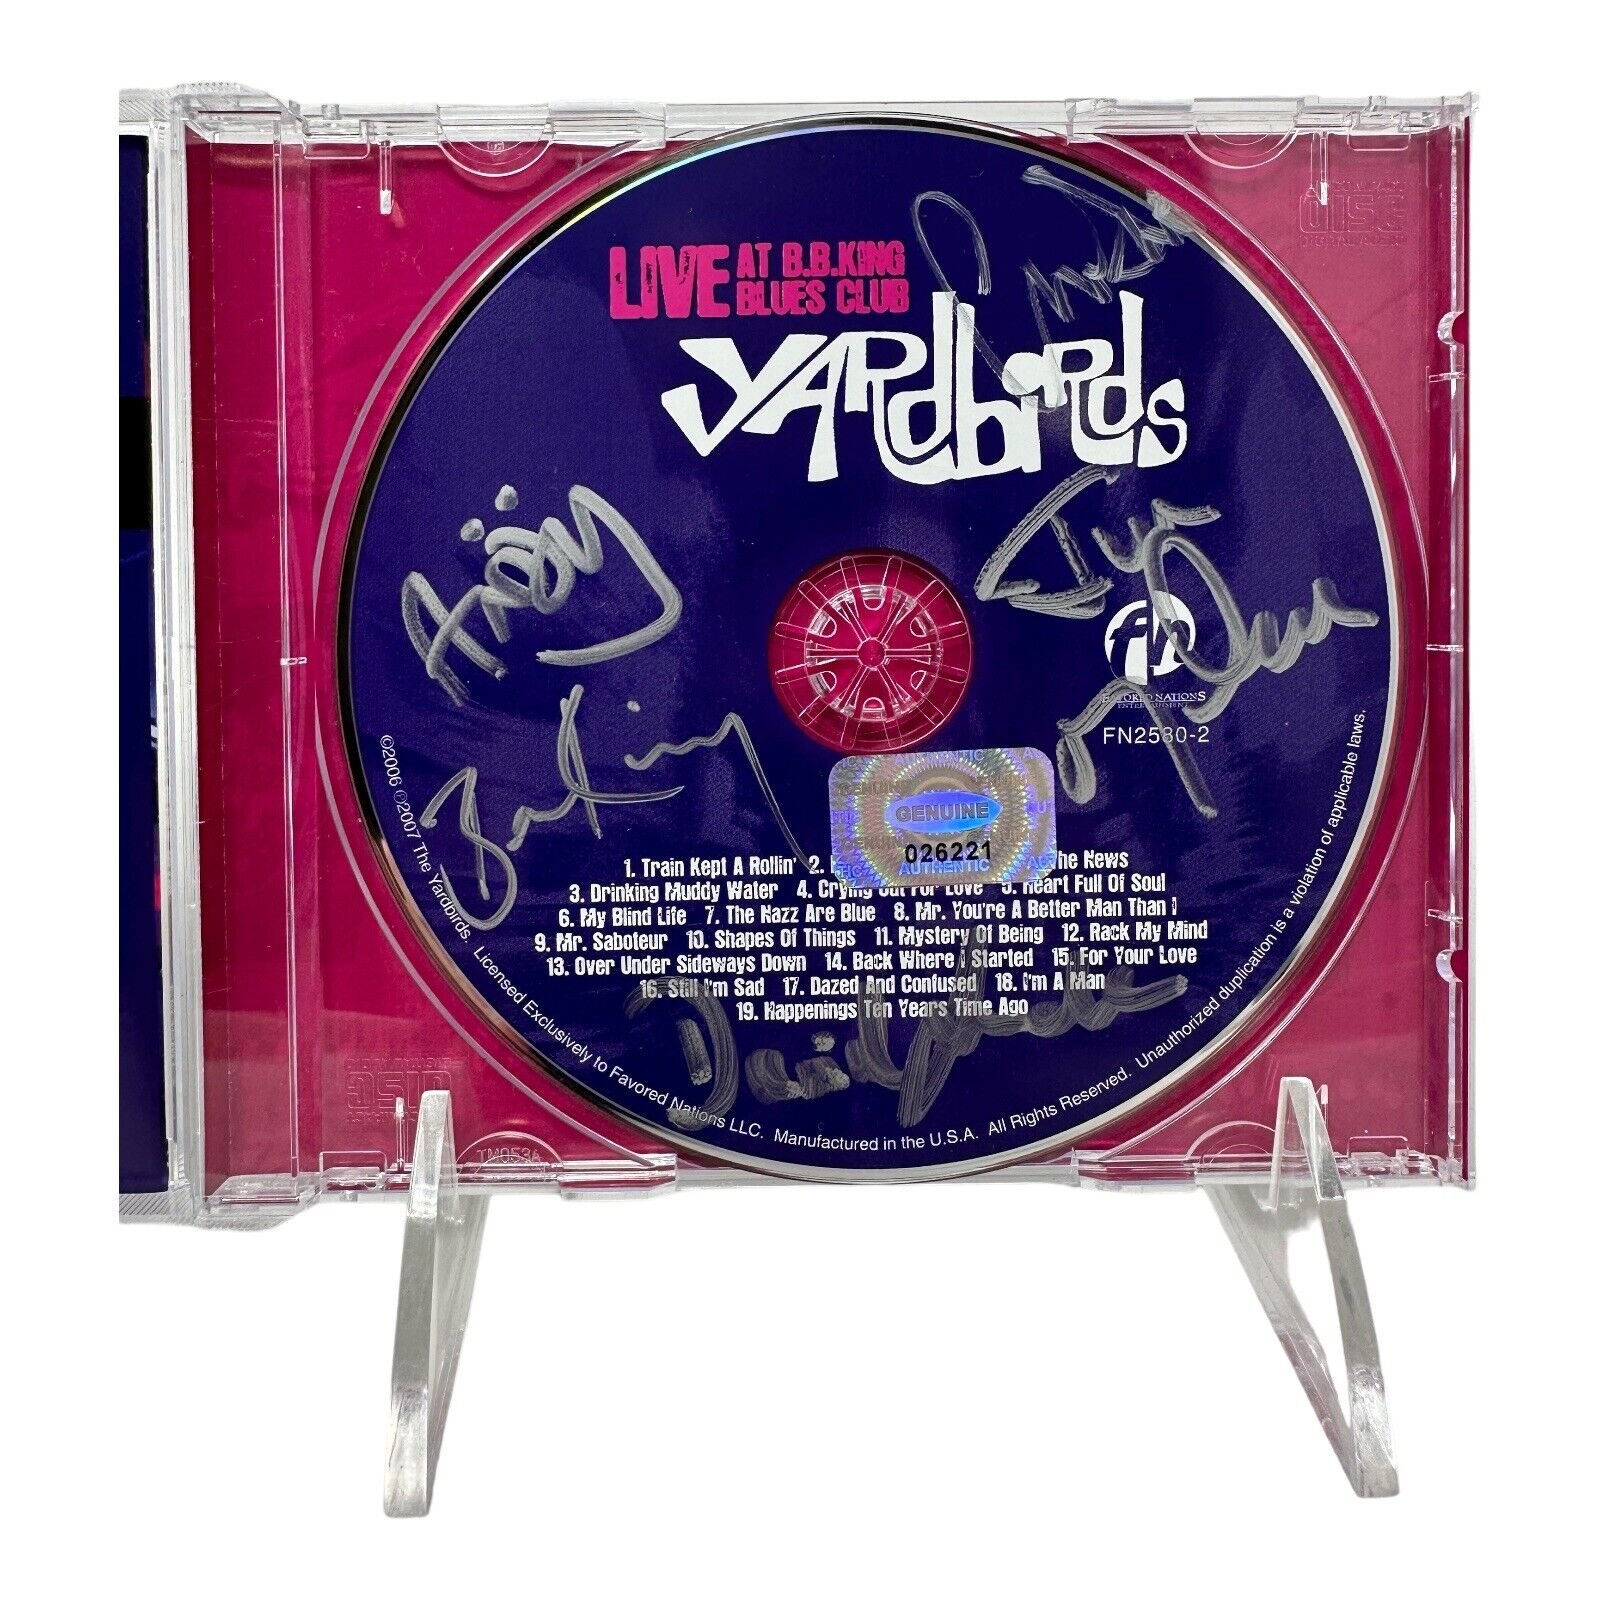 THE YARDBIRDS (Group Band) Signed Autograph Album CD Live at B.B. King w/ LOA